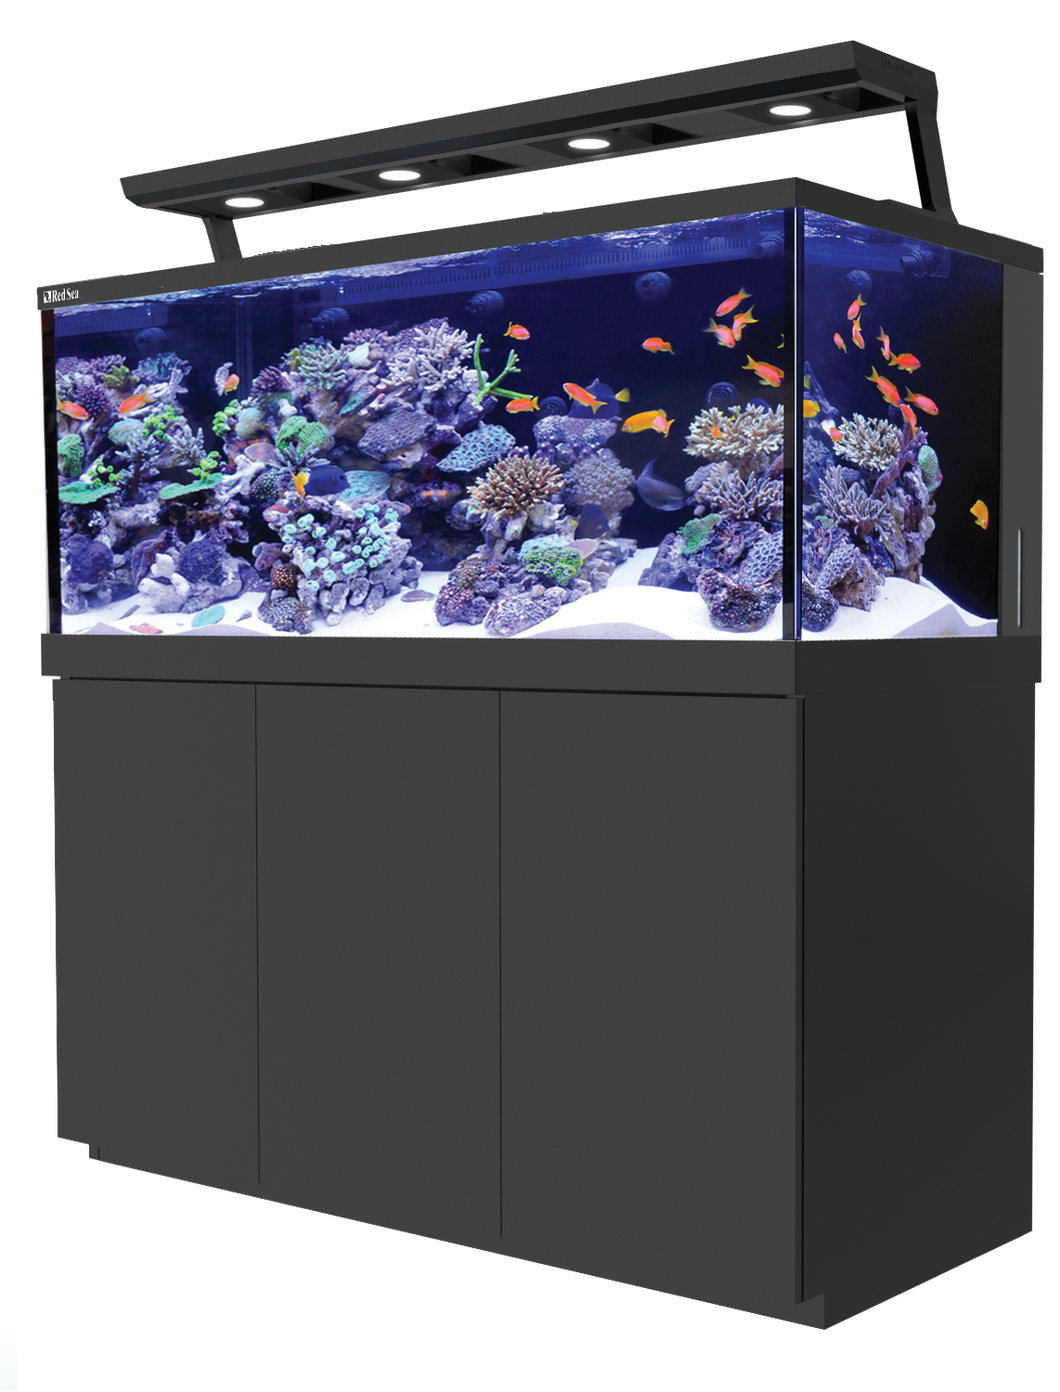 Red Sea MAX S-650 - Complete All-in-One LED Reef Aquarium 175 Gallons